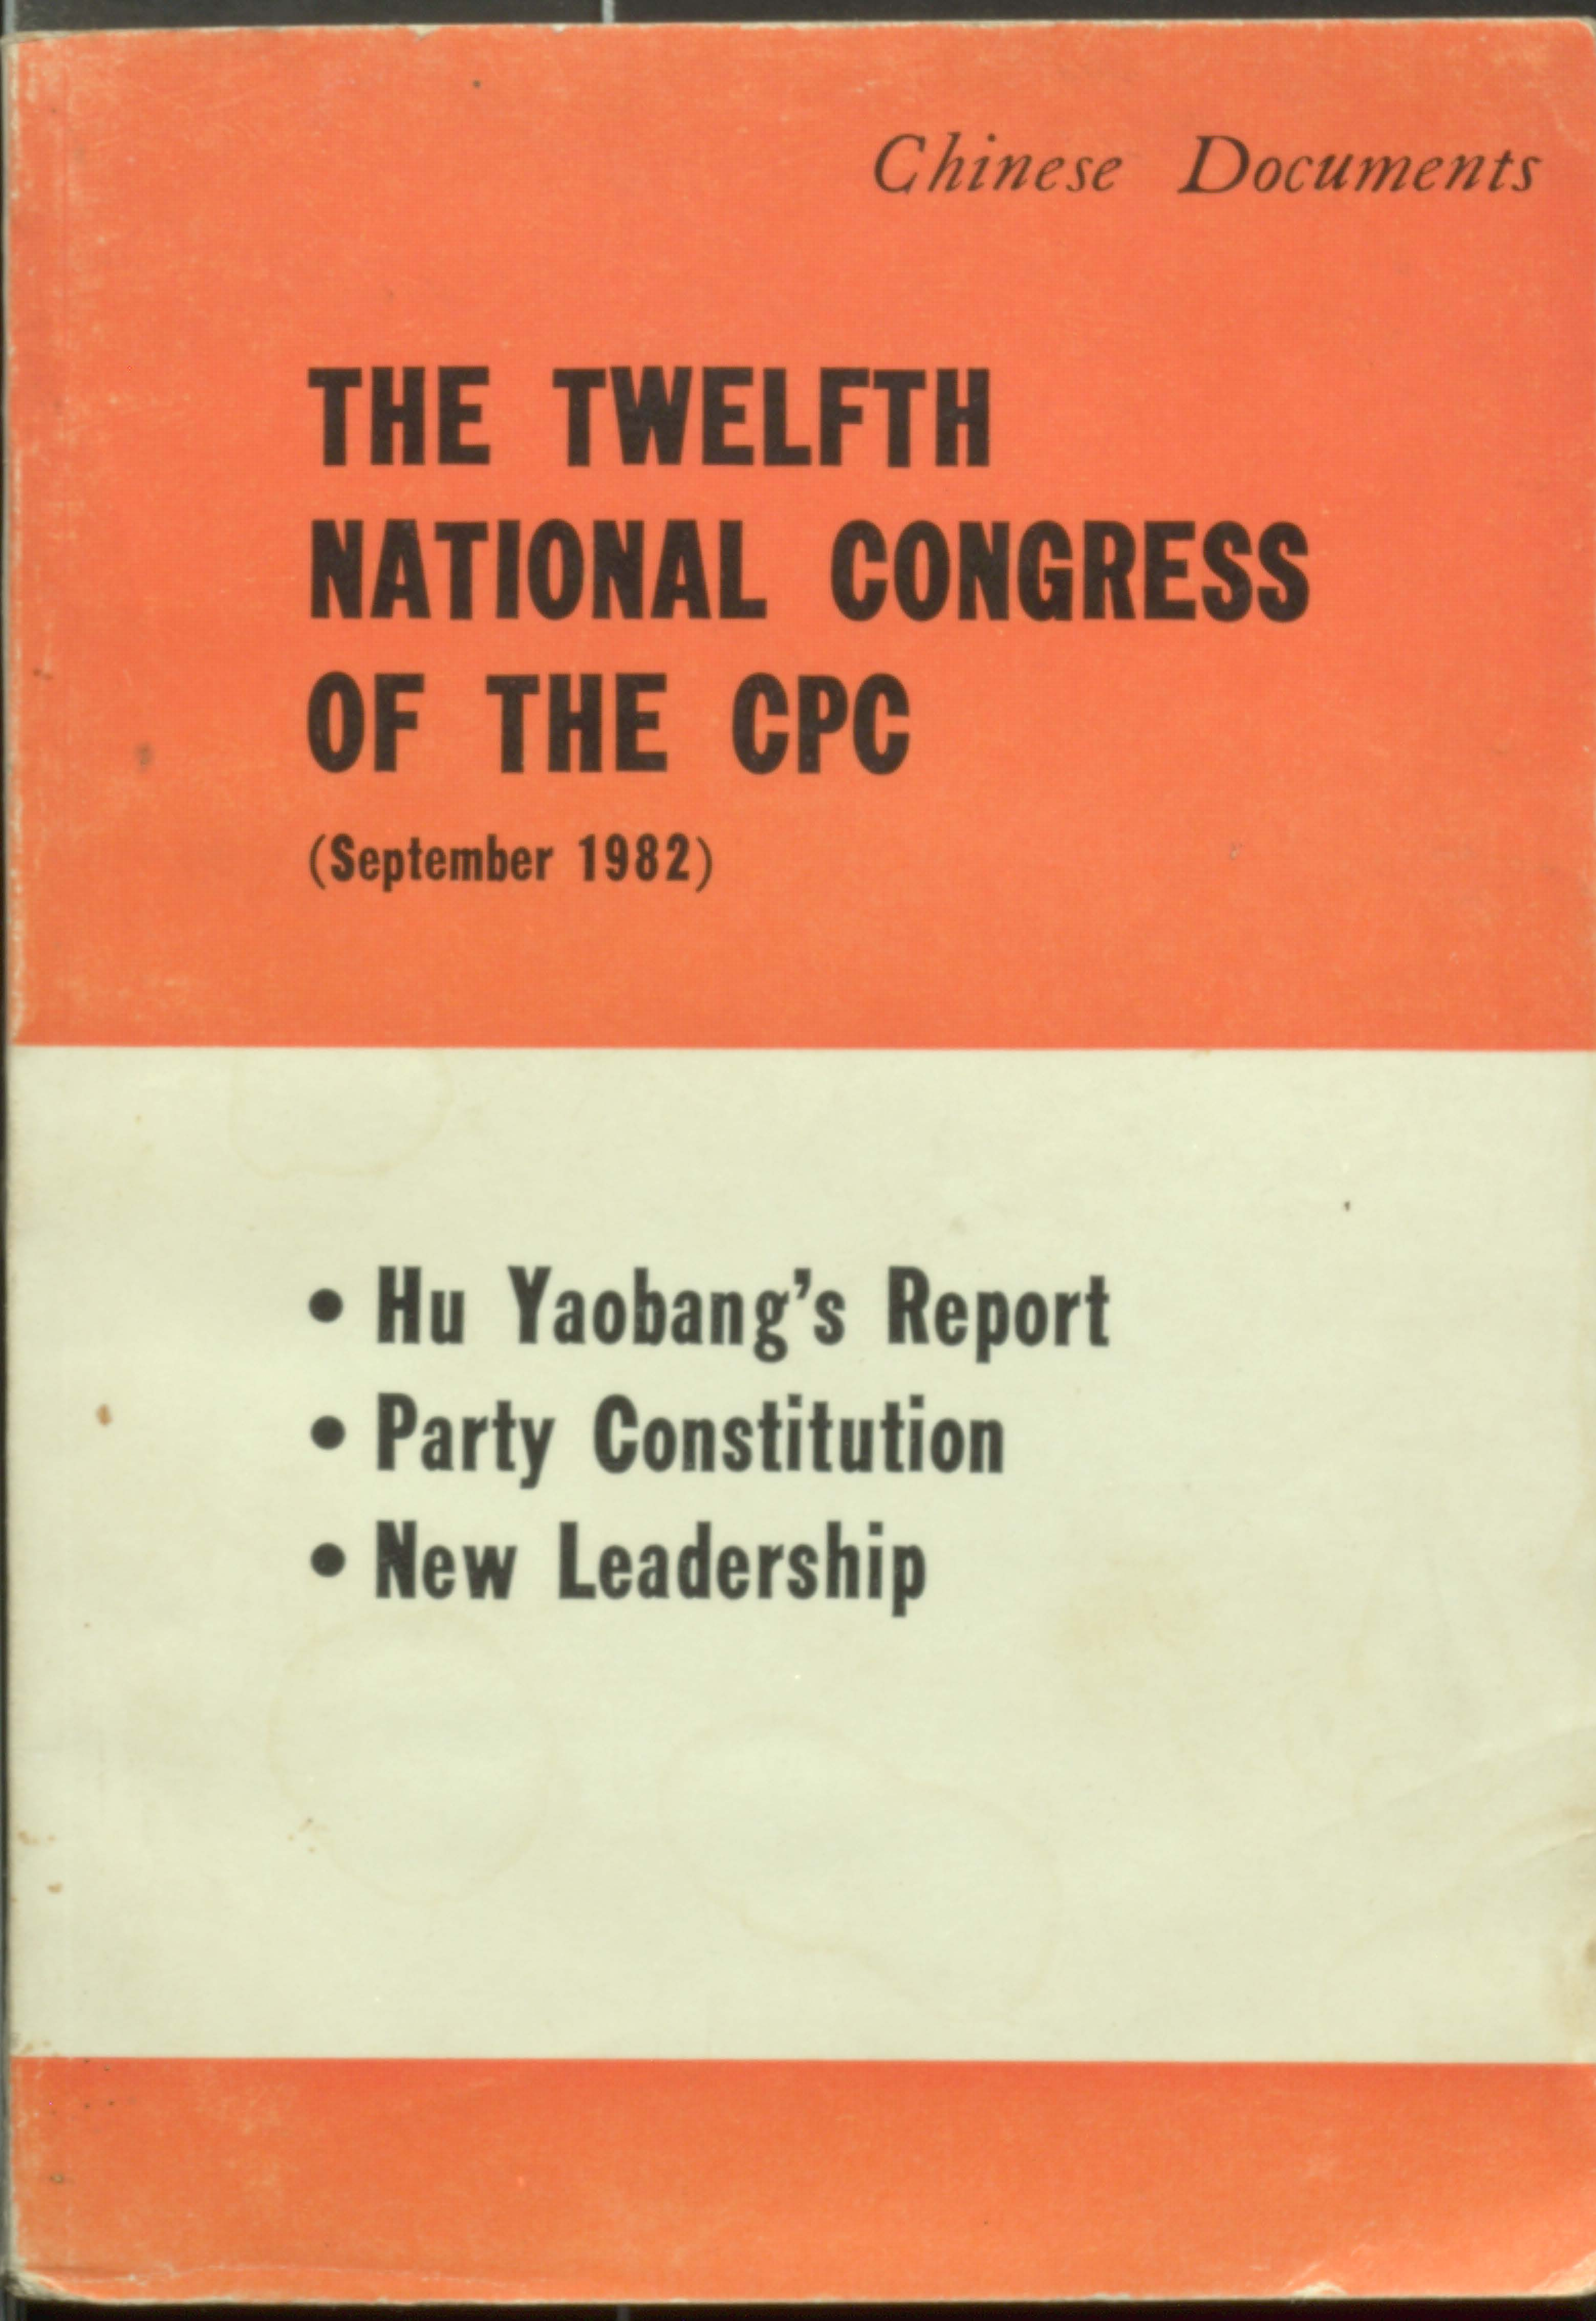 The Twelfth National Congress of the CPC